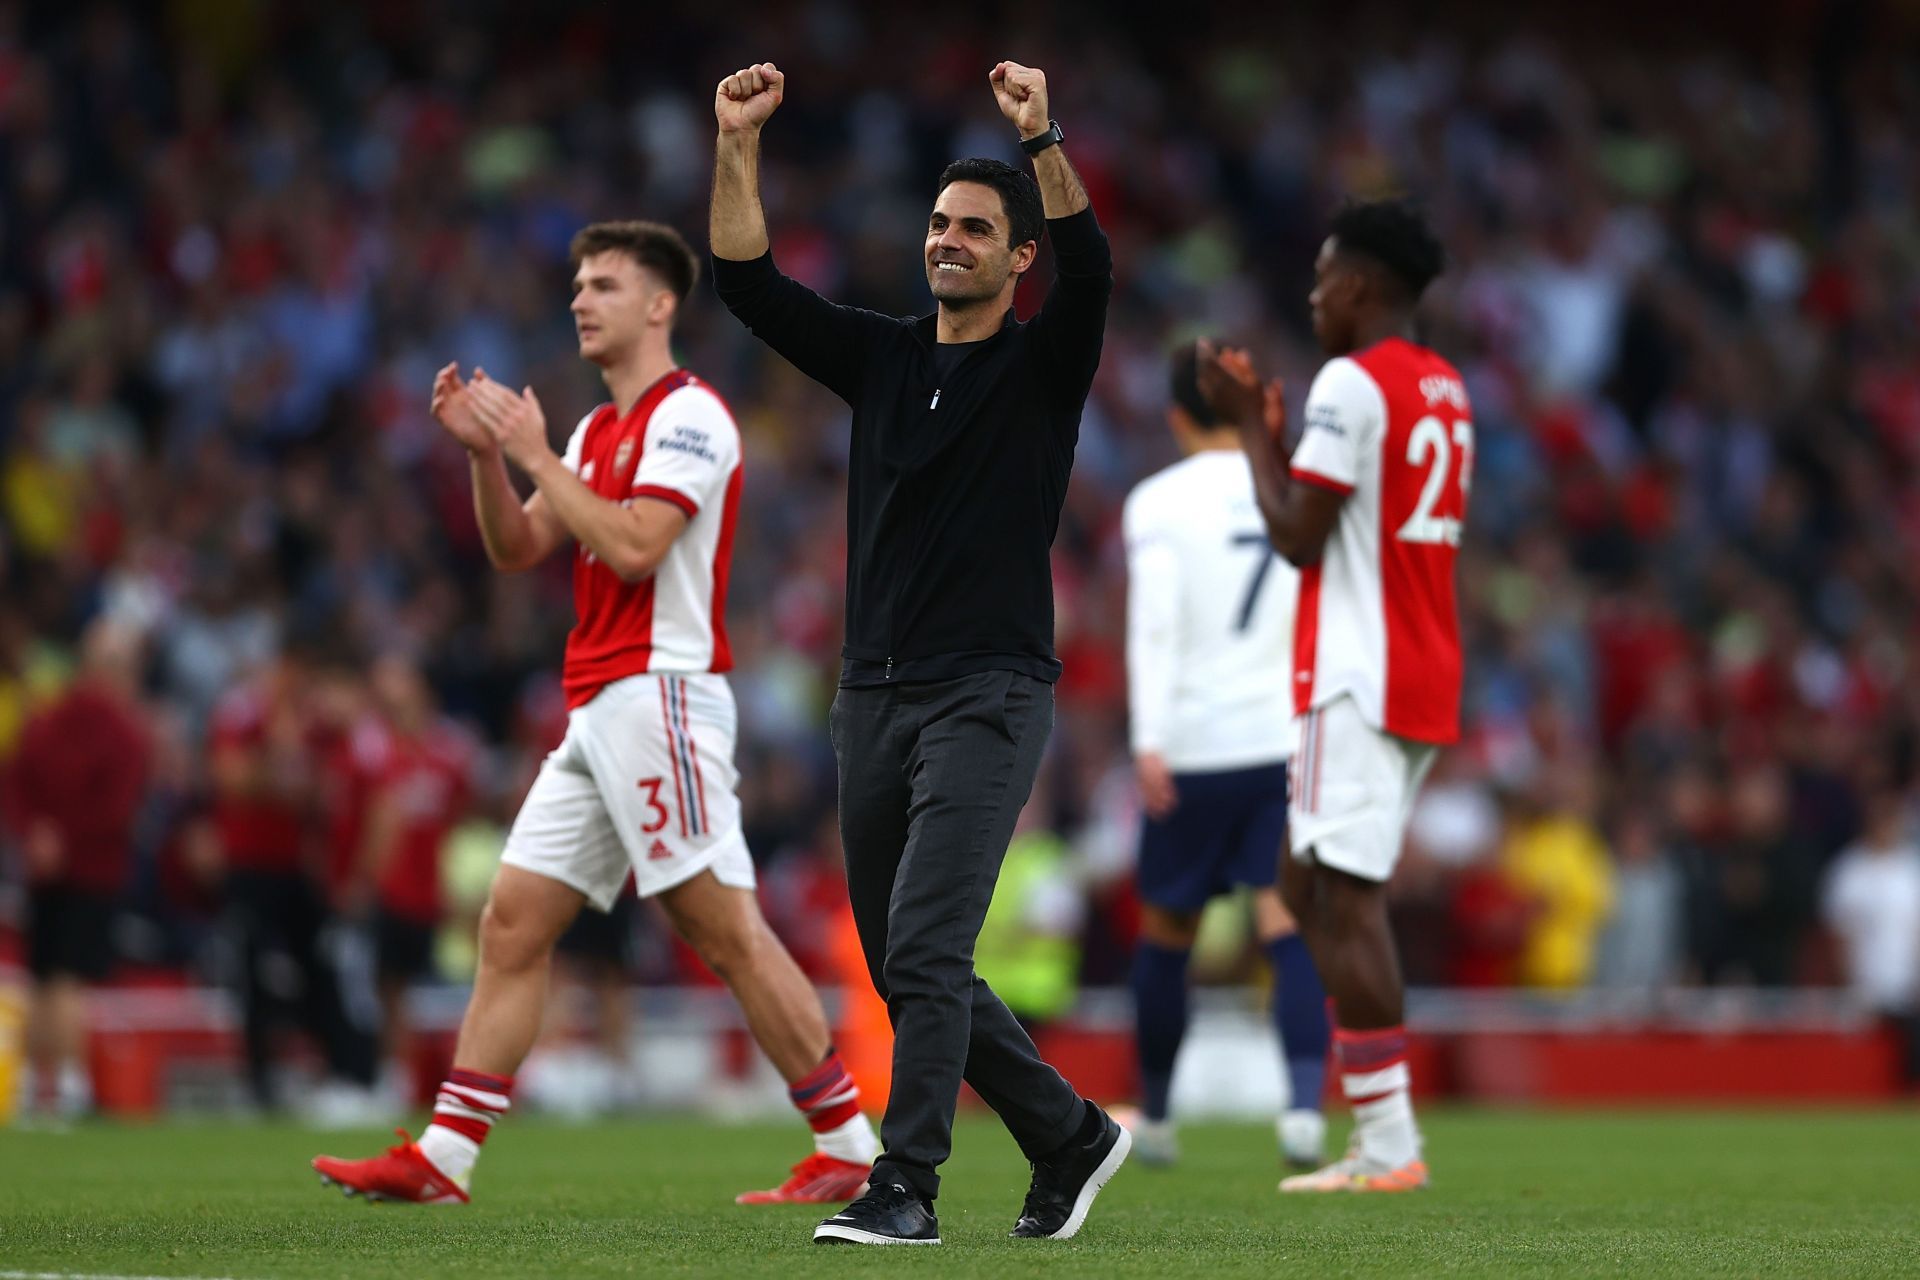 Arsenal manager Mikel Arteta saw his team draw against Crystal Palace.